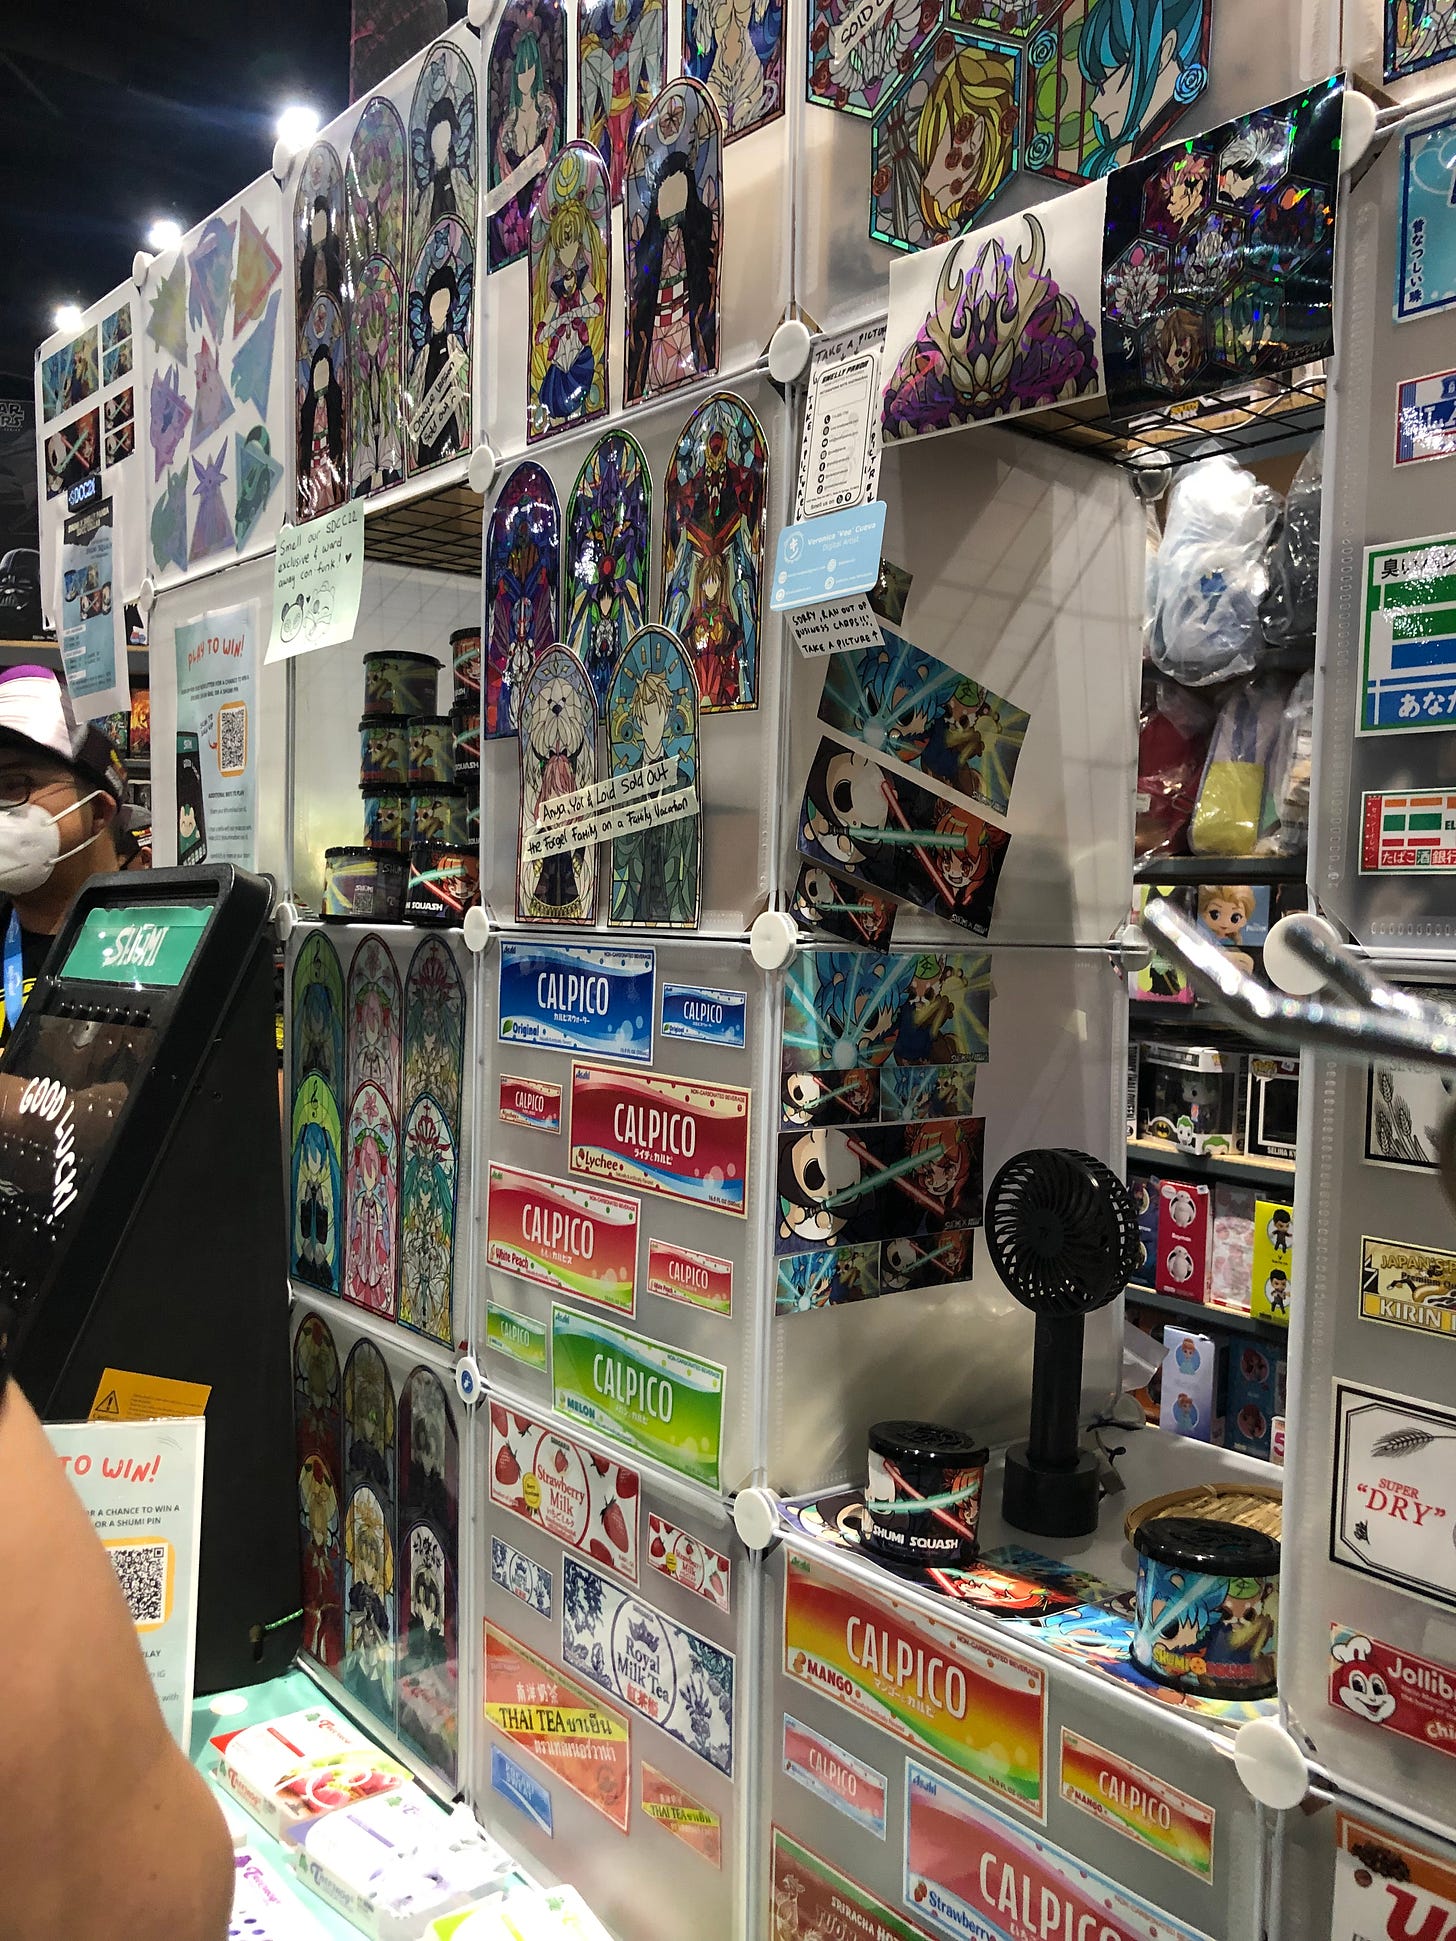 Anime stickers! And air fresheners which by GOD were delightful to sniff in the hall.